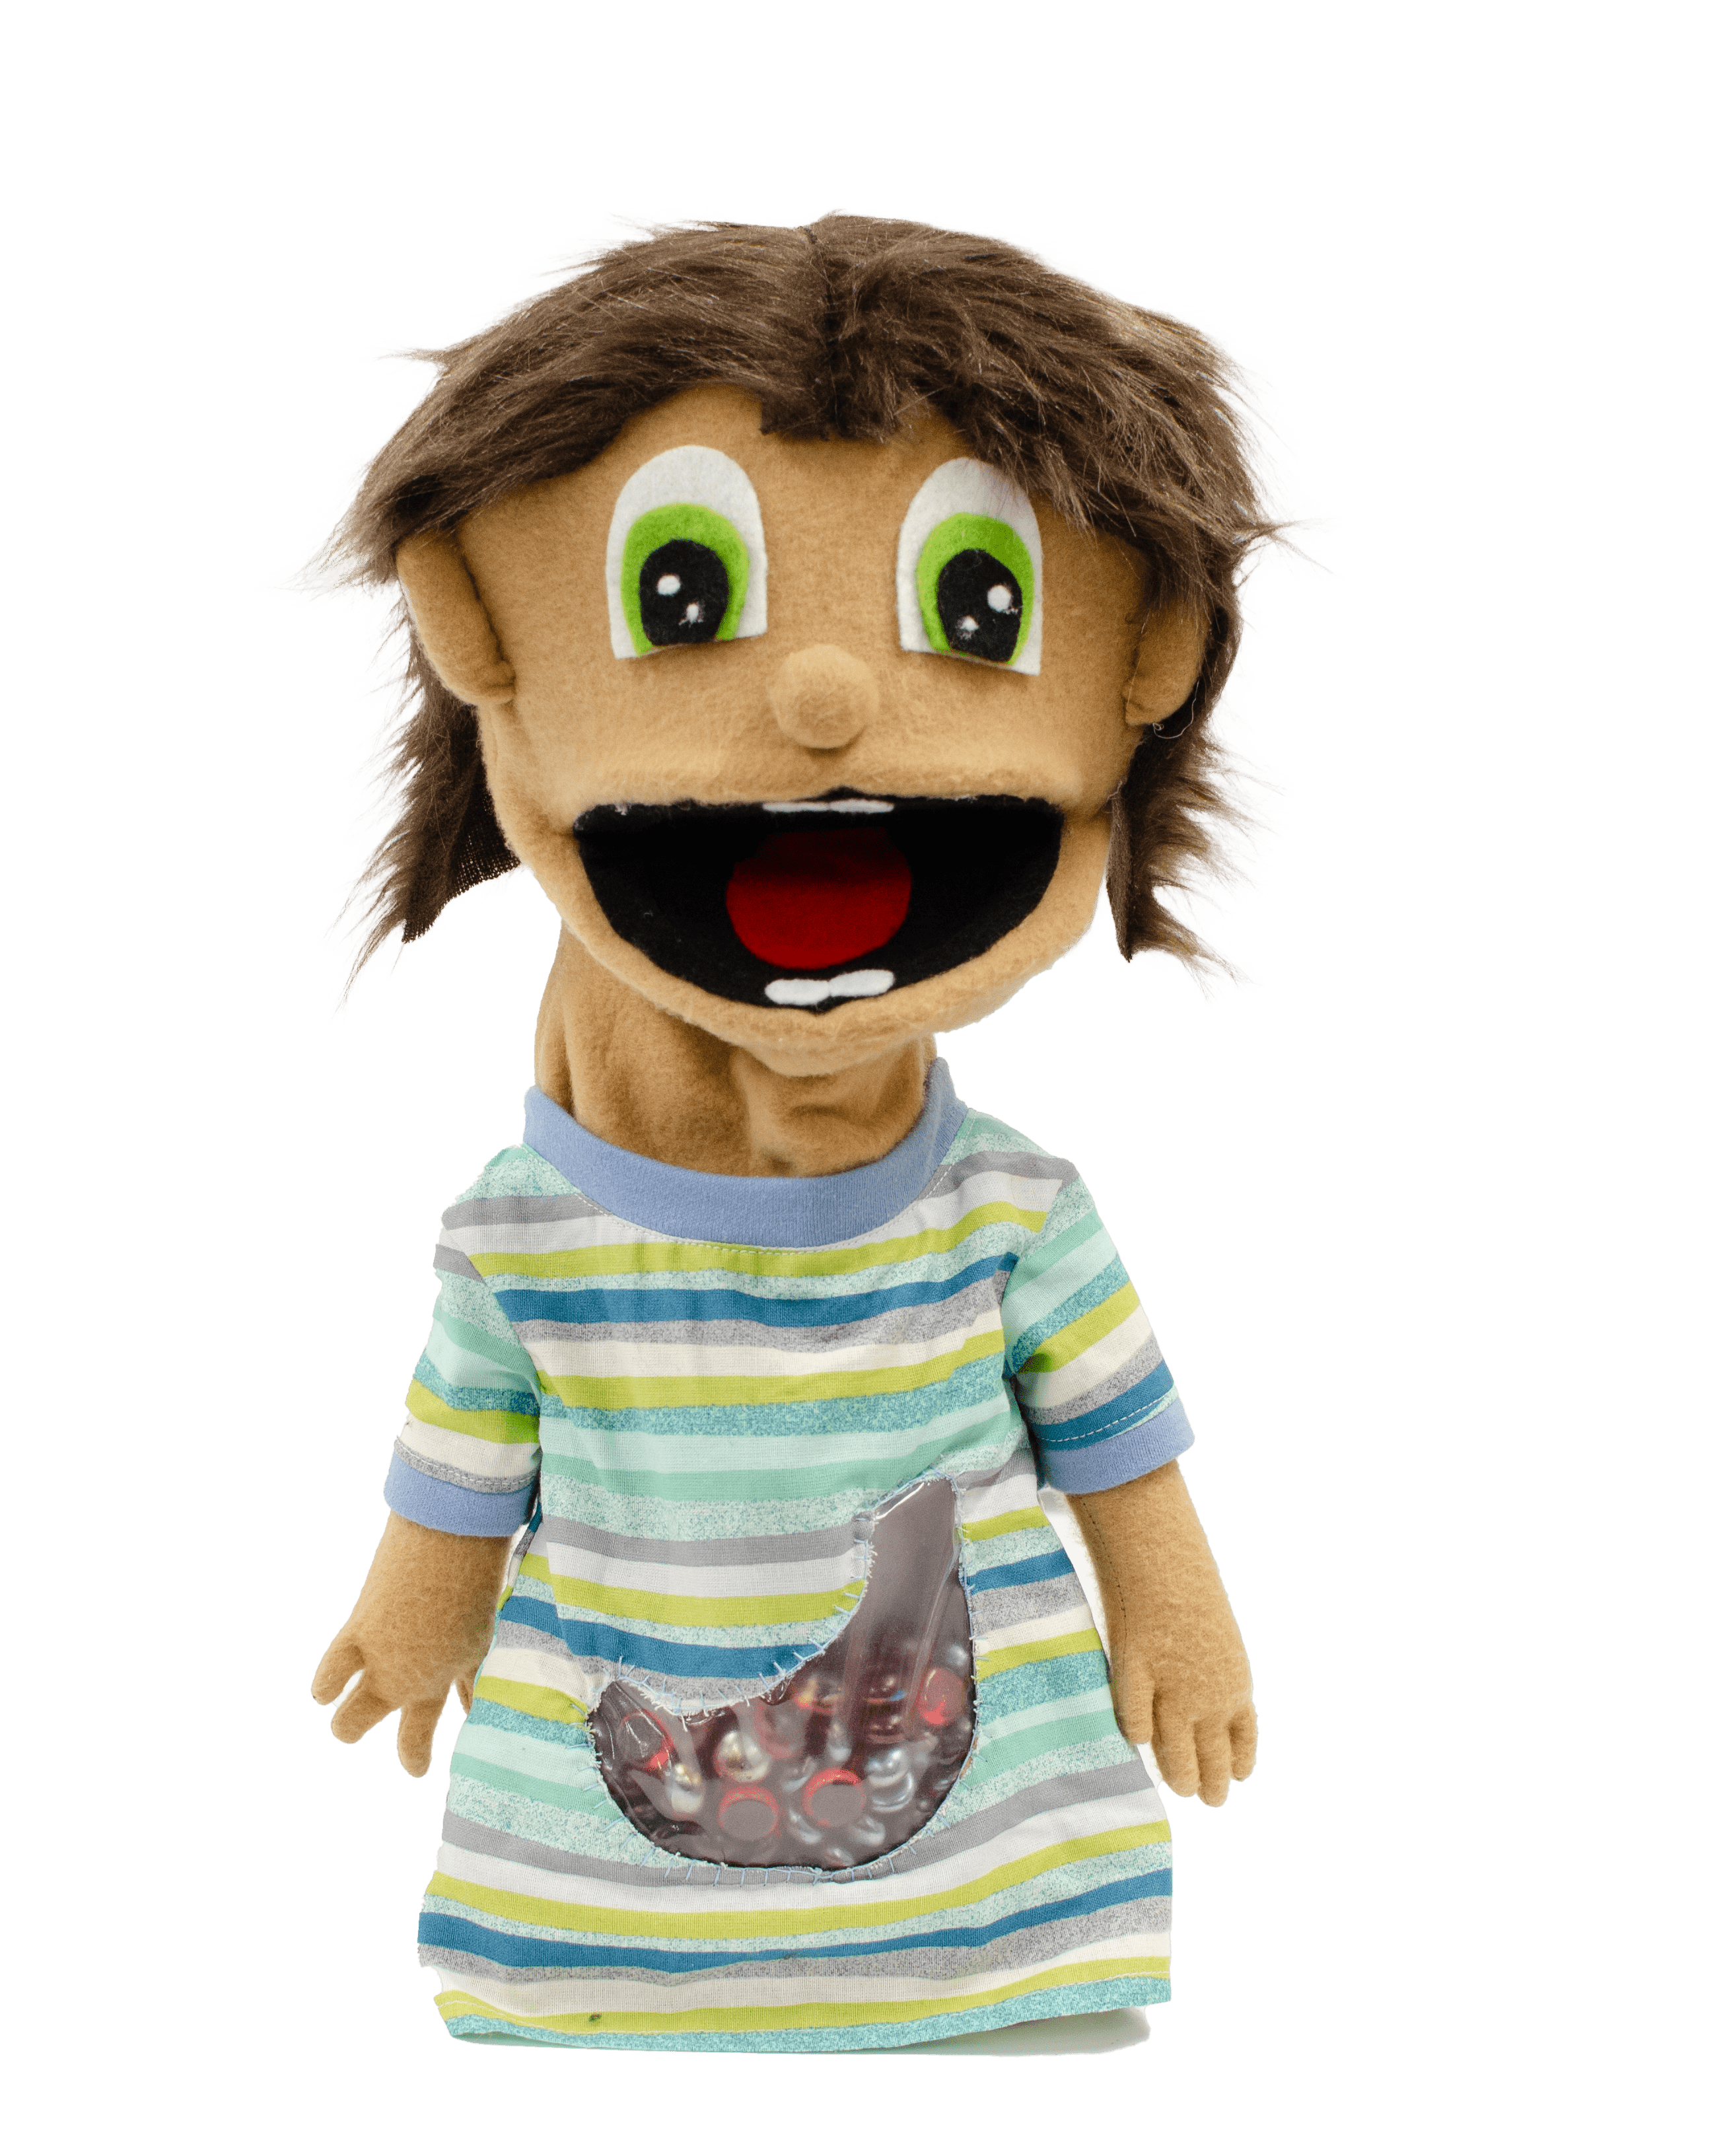 Parker the puppet used by CCOR